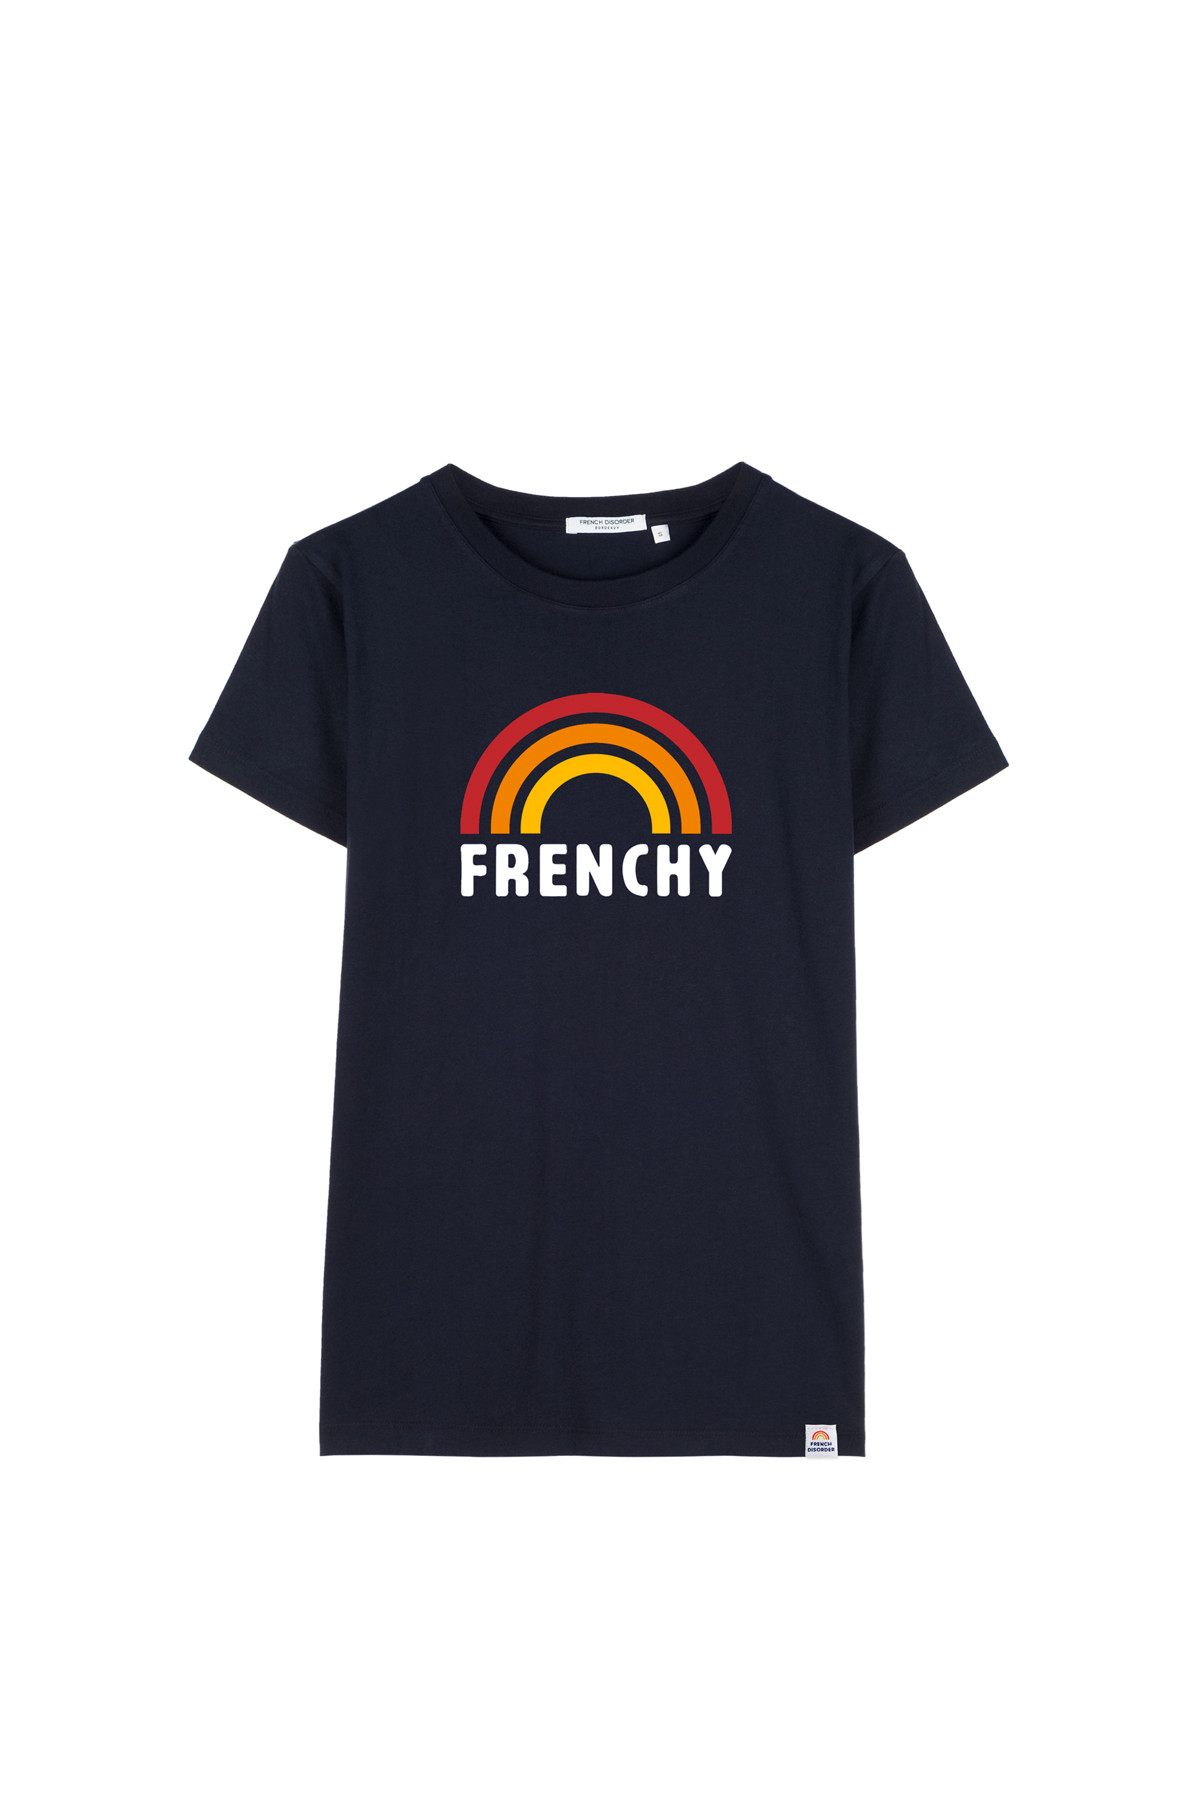 T-shirt FRENCHY French Disorder